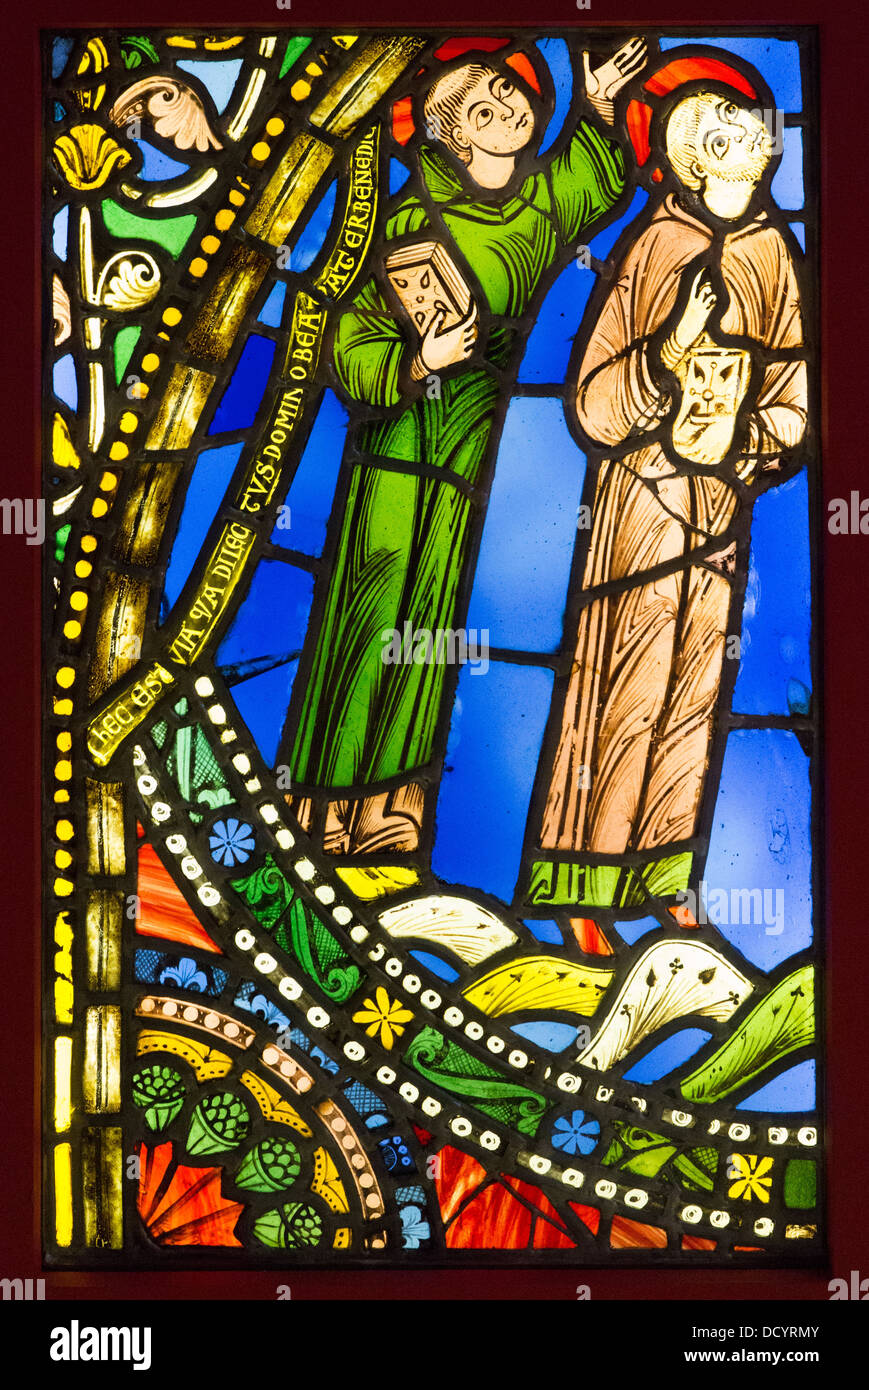 Stained Glass - Musée de Cluny / Musée National du Moyen Âge - Paris Philippe Sauvan-Magnet / Active Museum Stained Glass Stock Photo